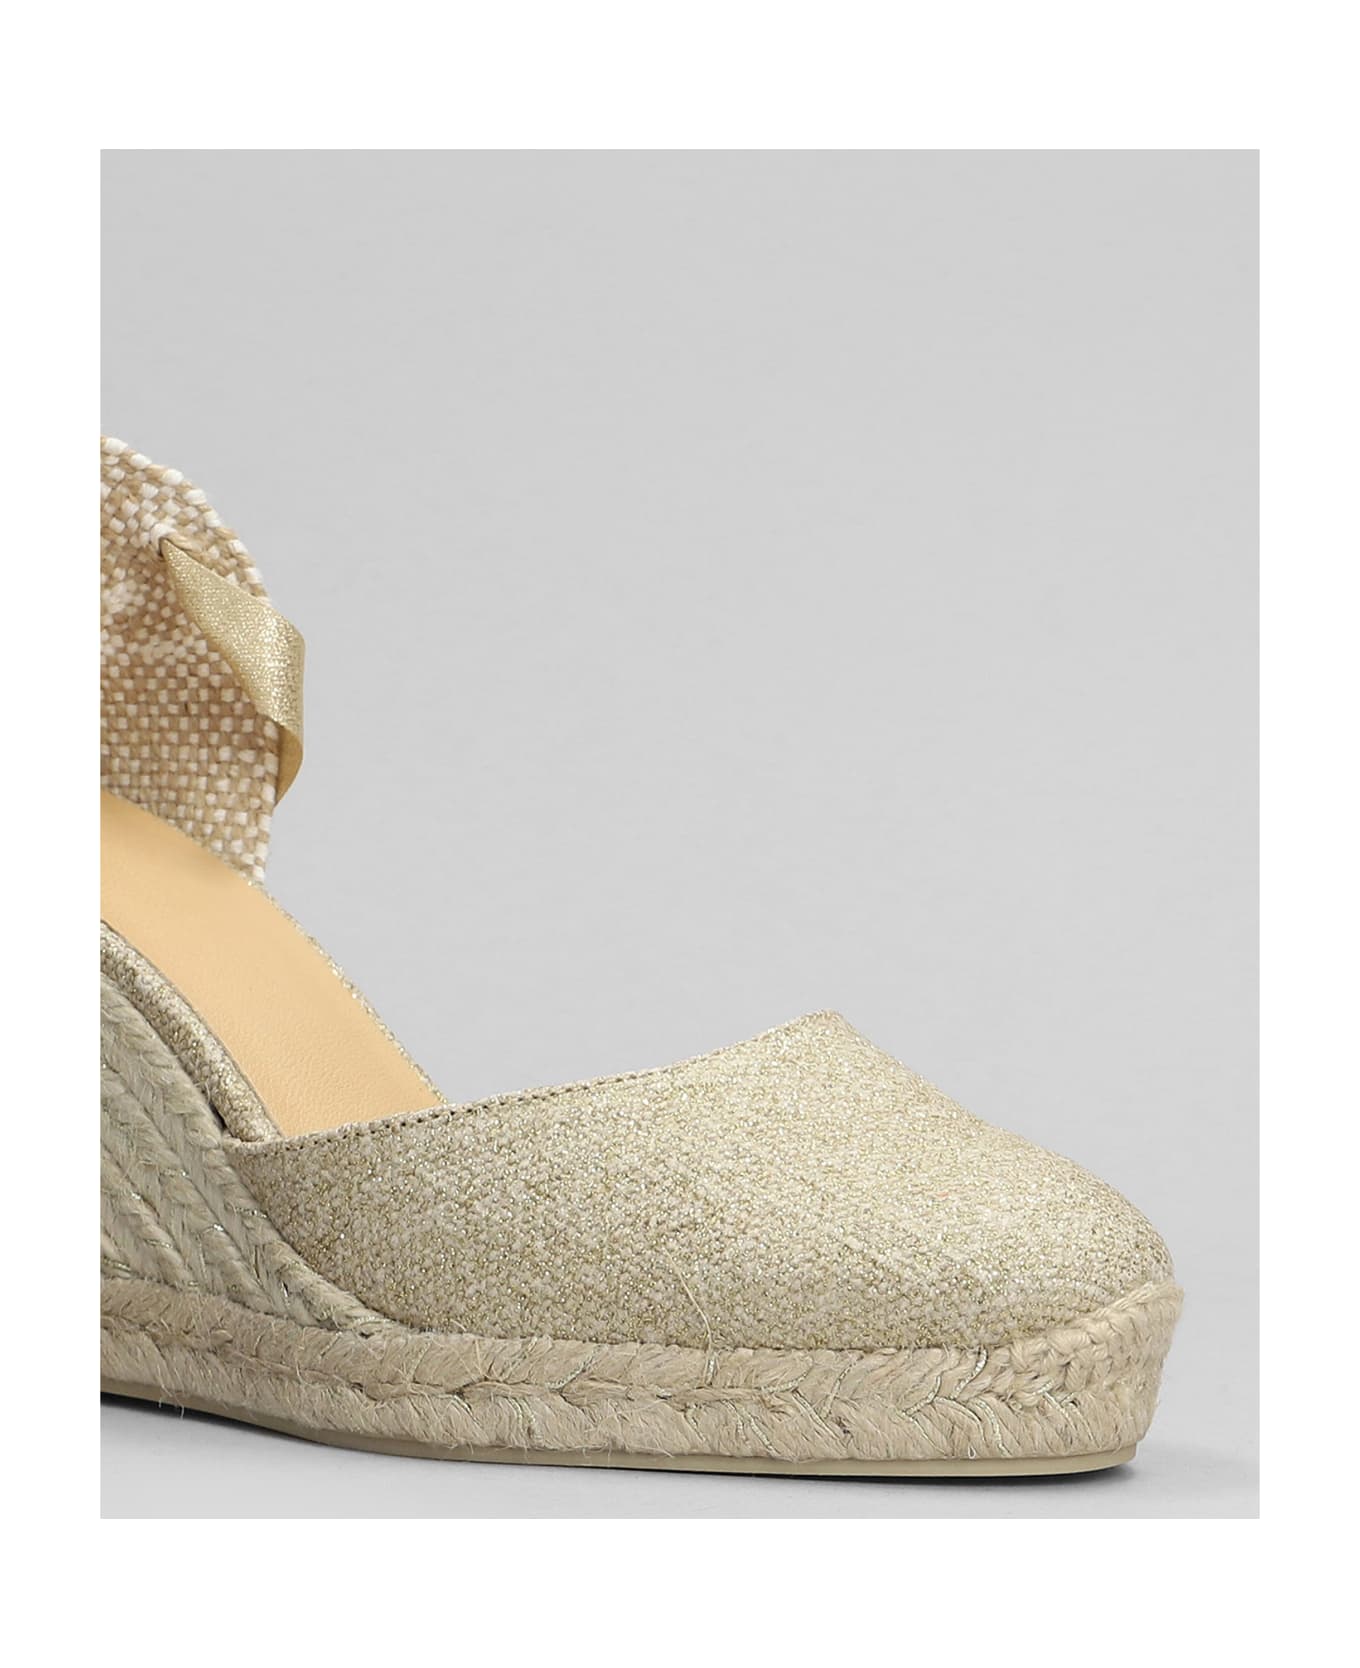 Castañer Carina-8-032 Wedges In Gold Canvas - gold